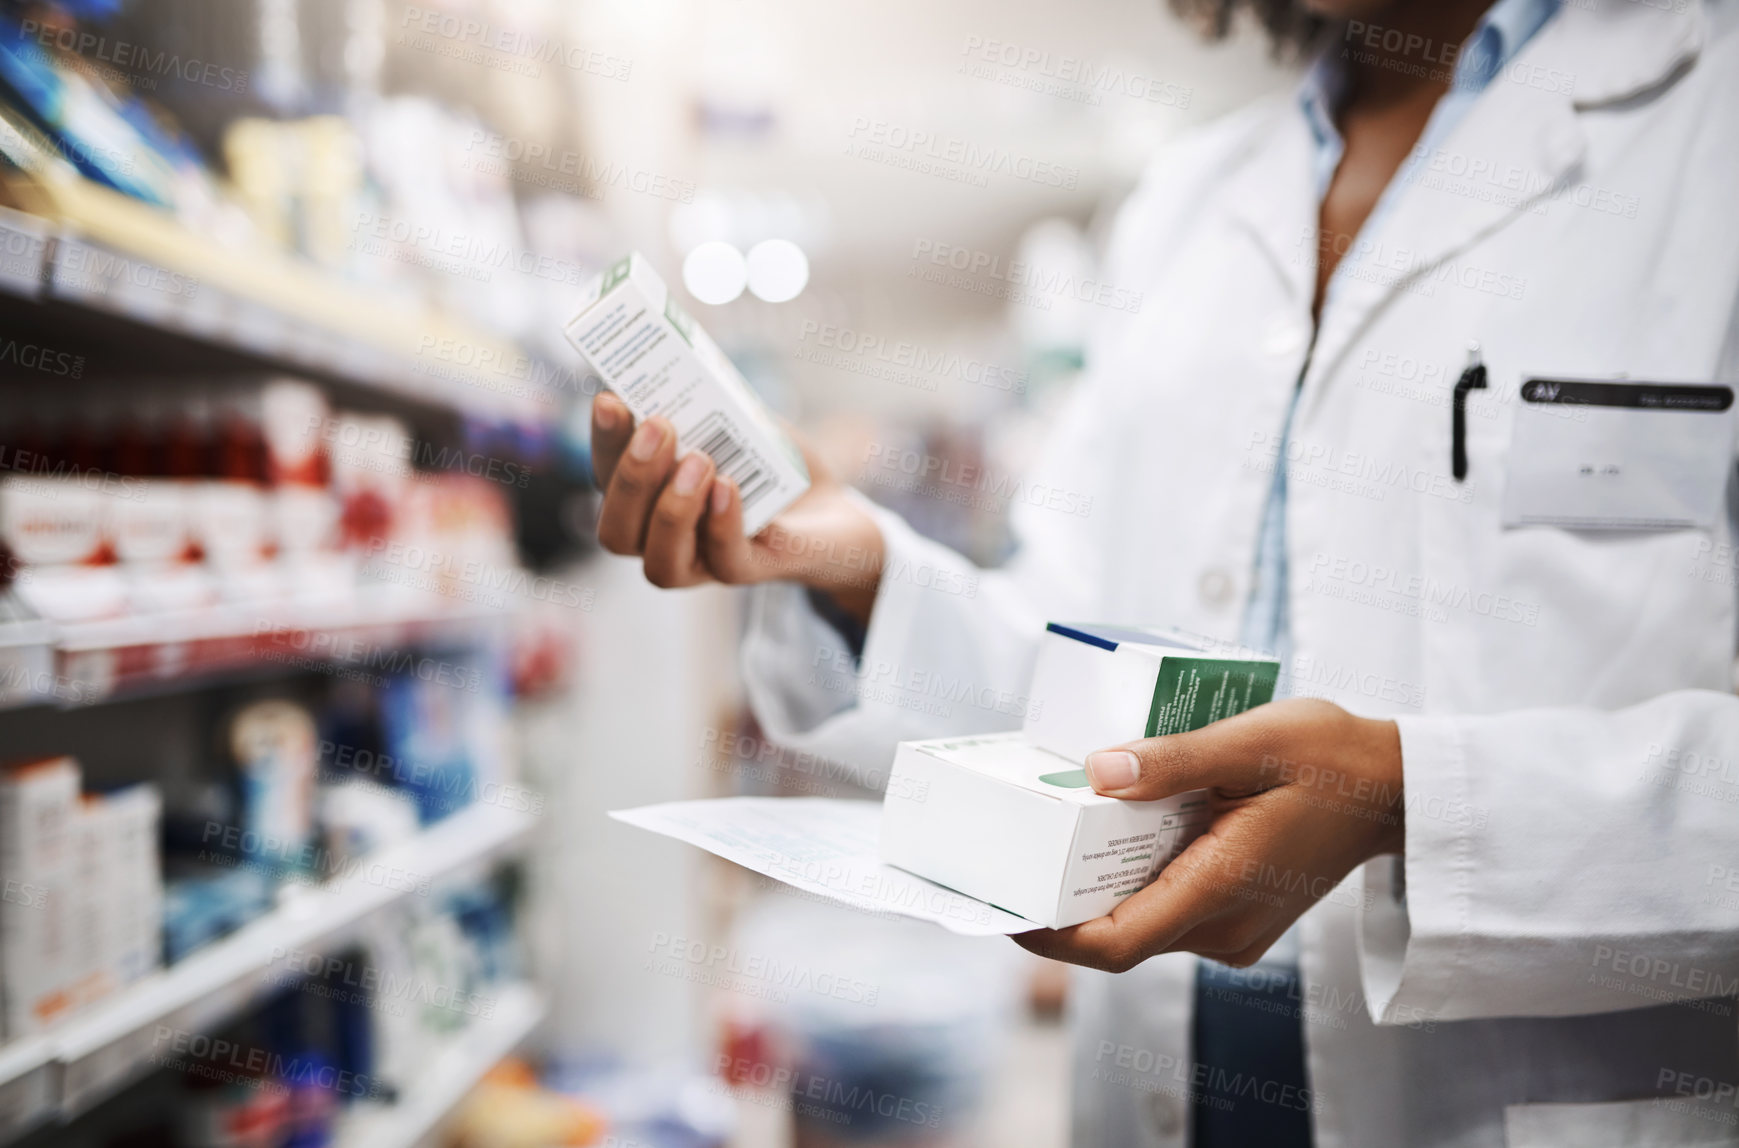 Buy stock photo Cropped shot of an unrecognizable young female pharmacist working in a pharmacy